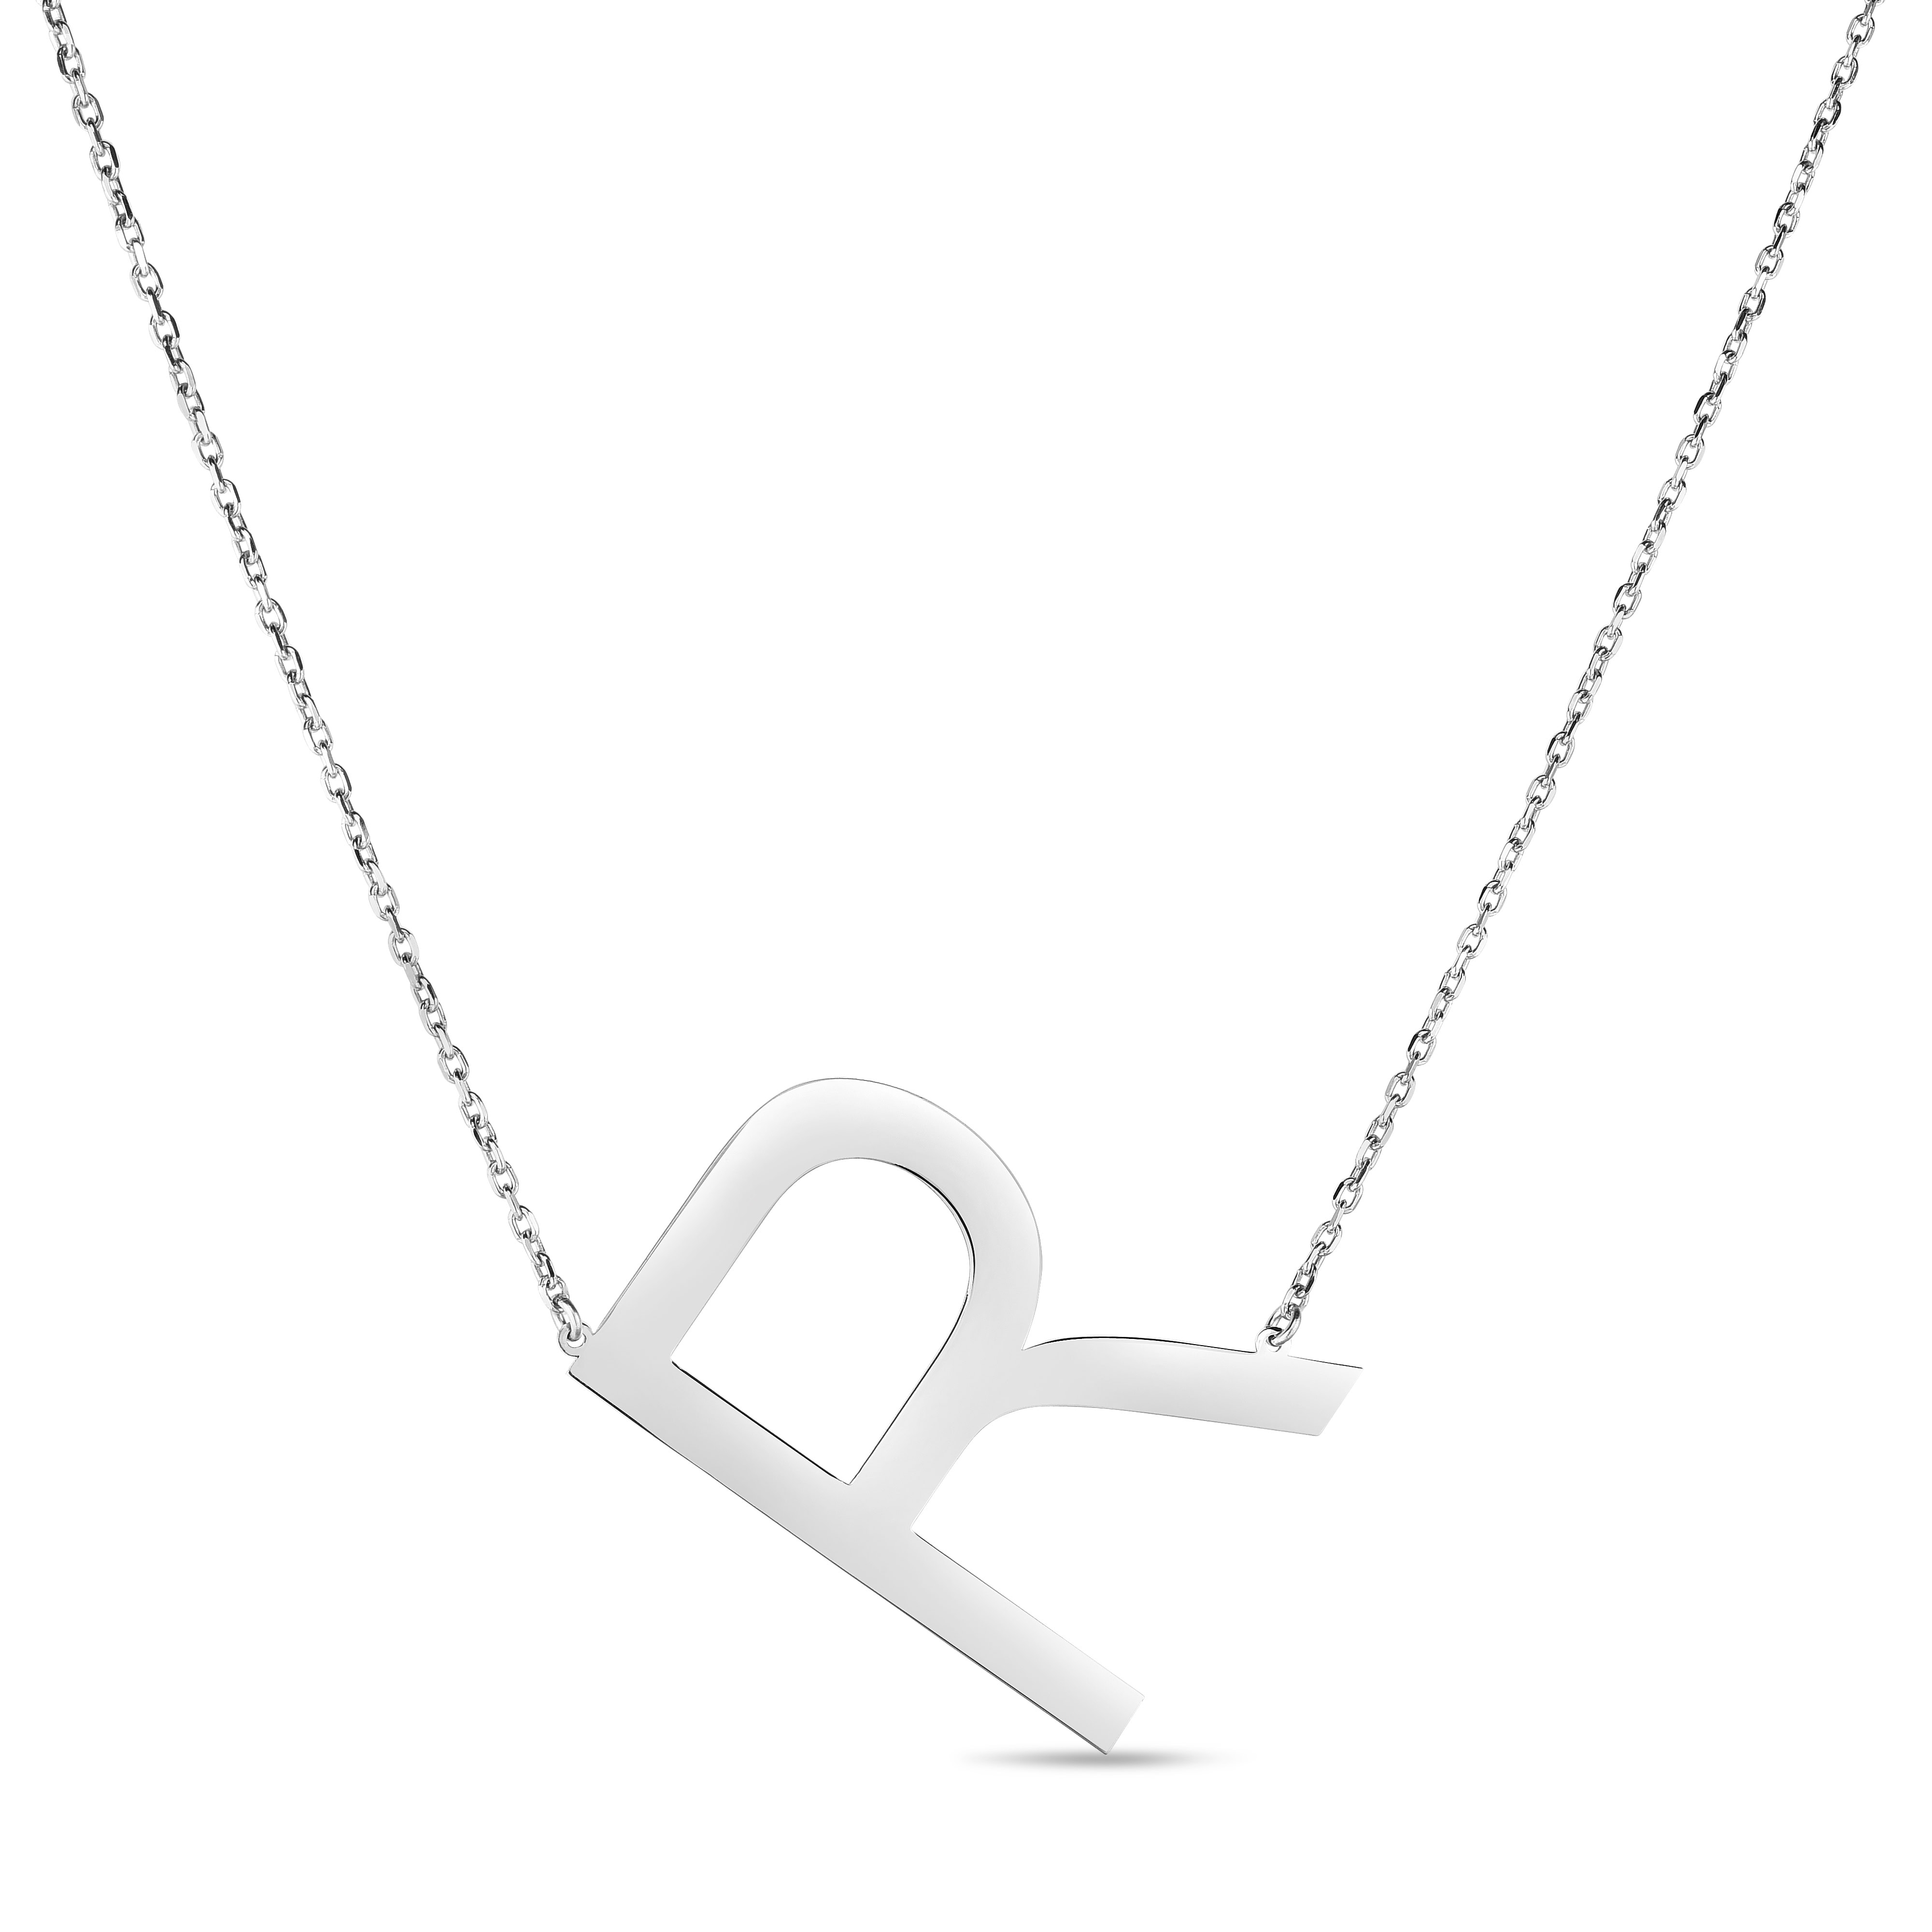 Silver R Letter Necklace